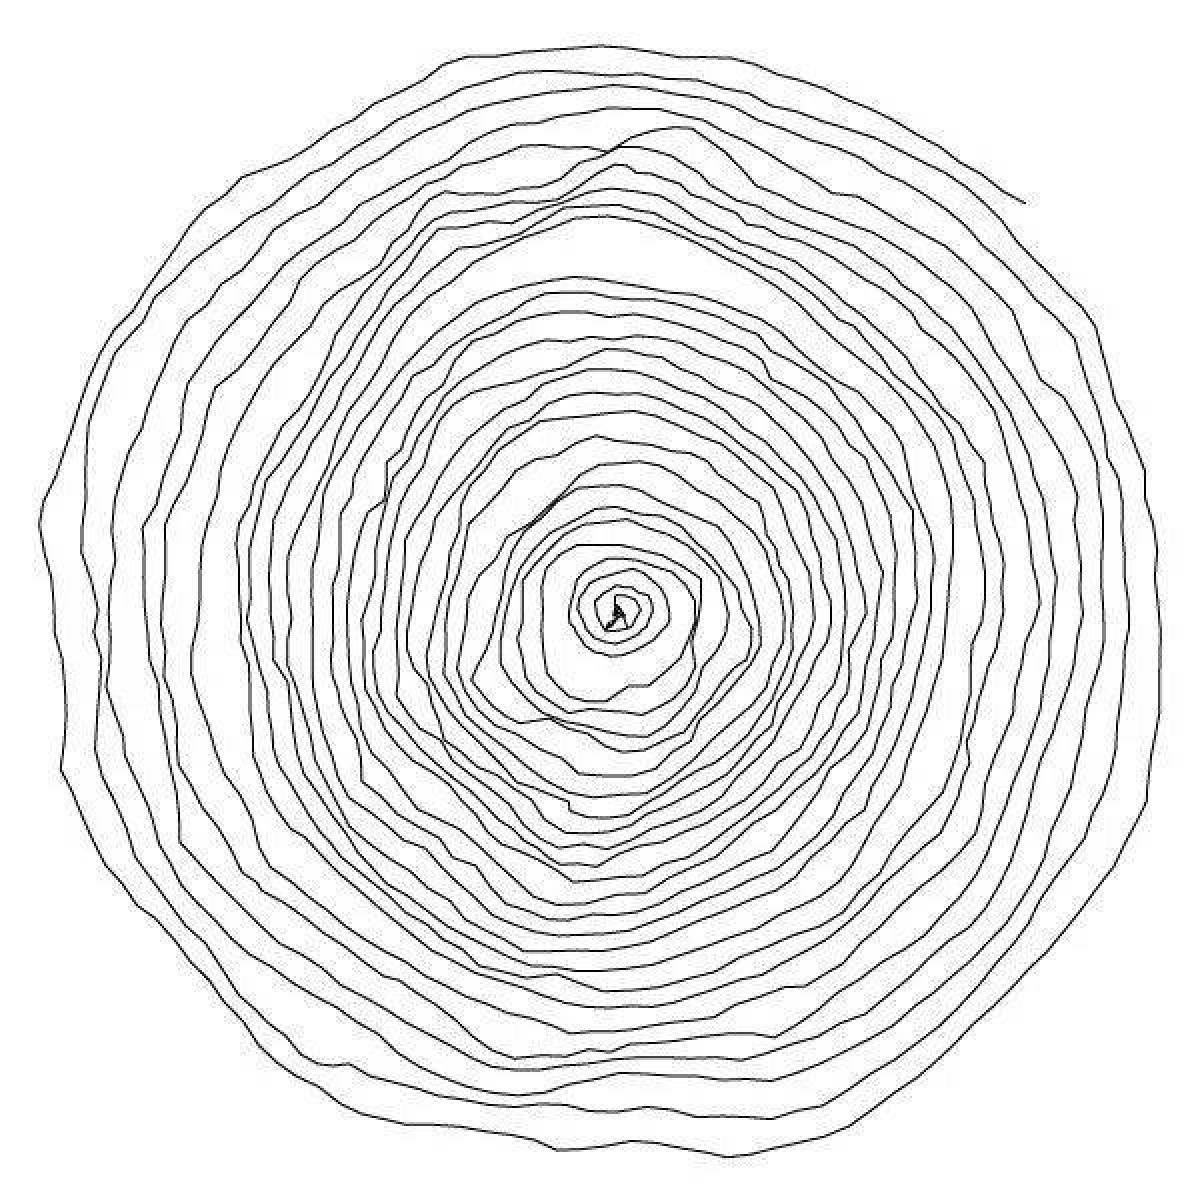 Coloring page striking circle with lines